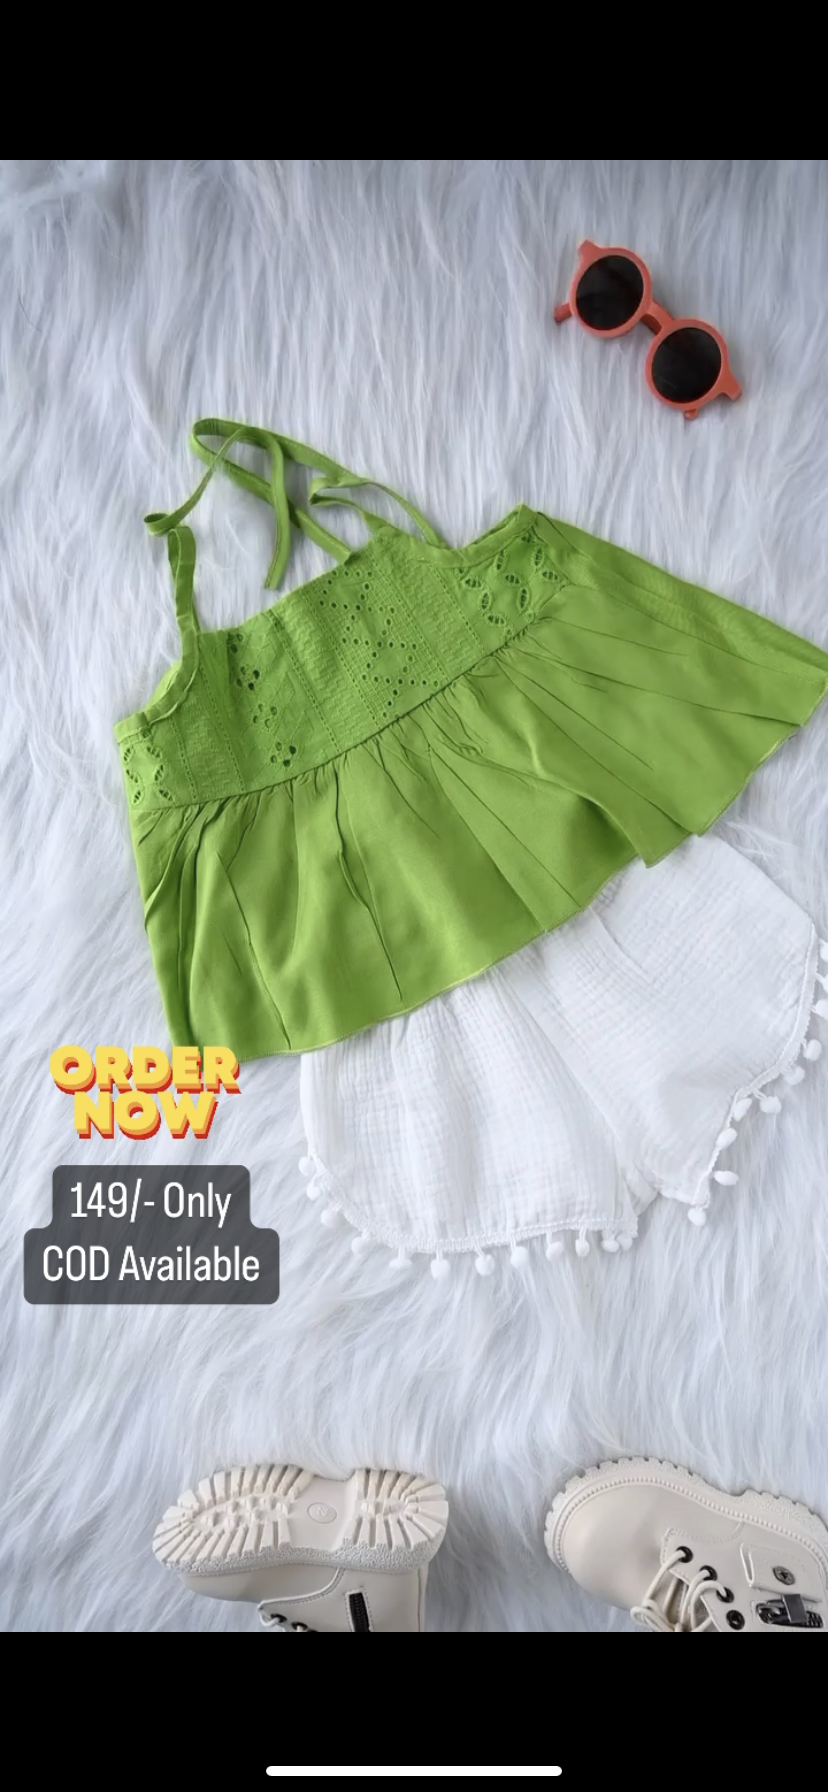 Green Top And White Bottom For Kids On Sale